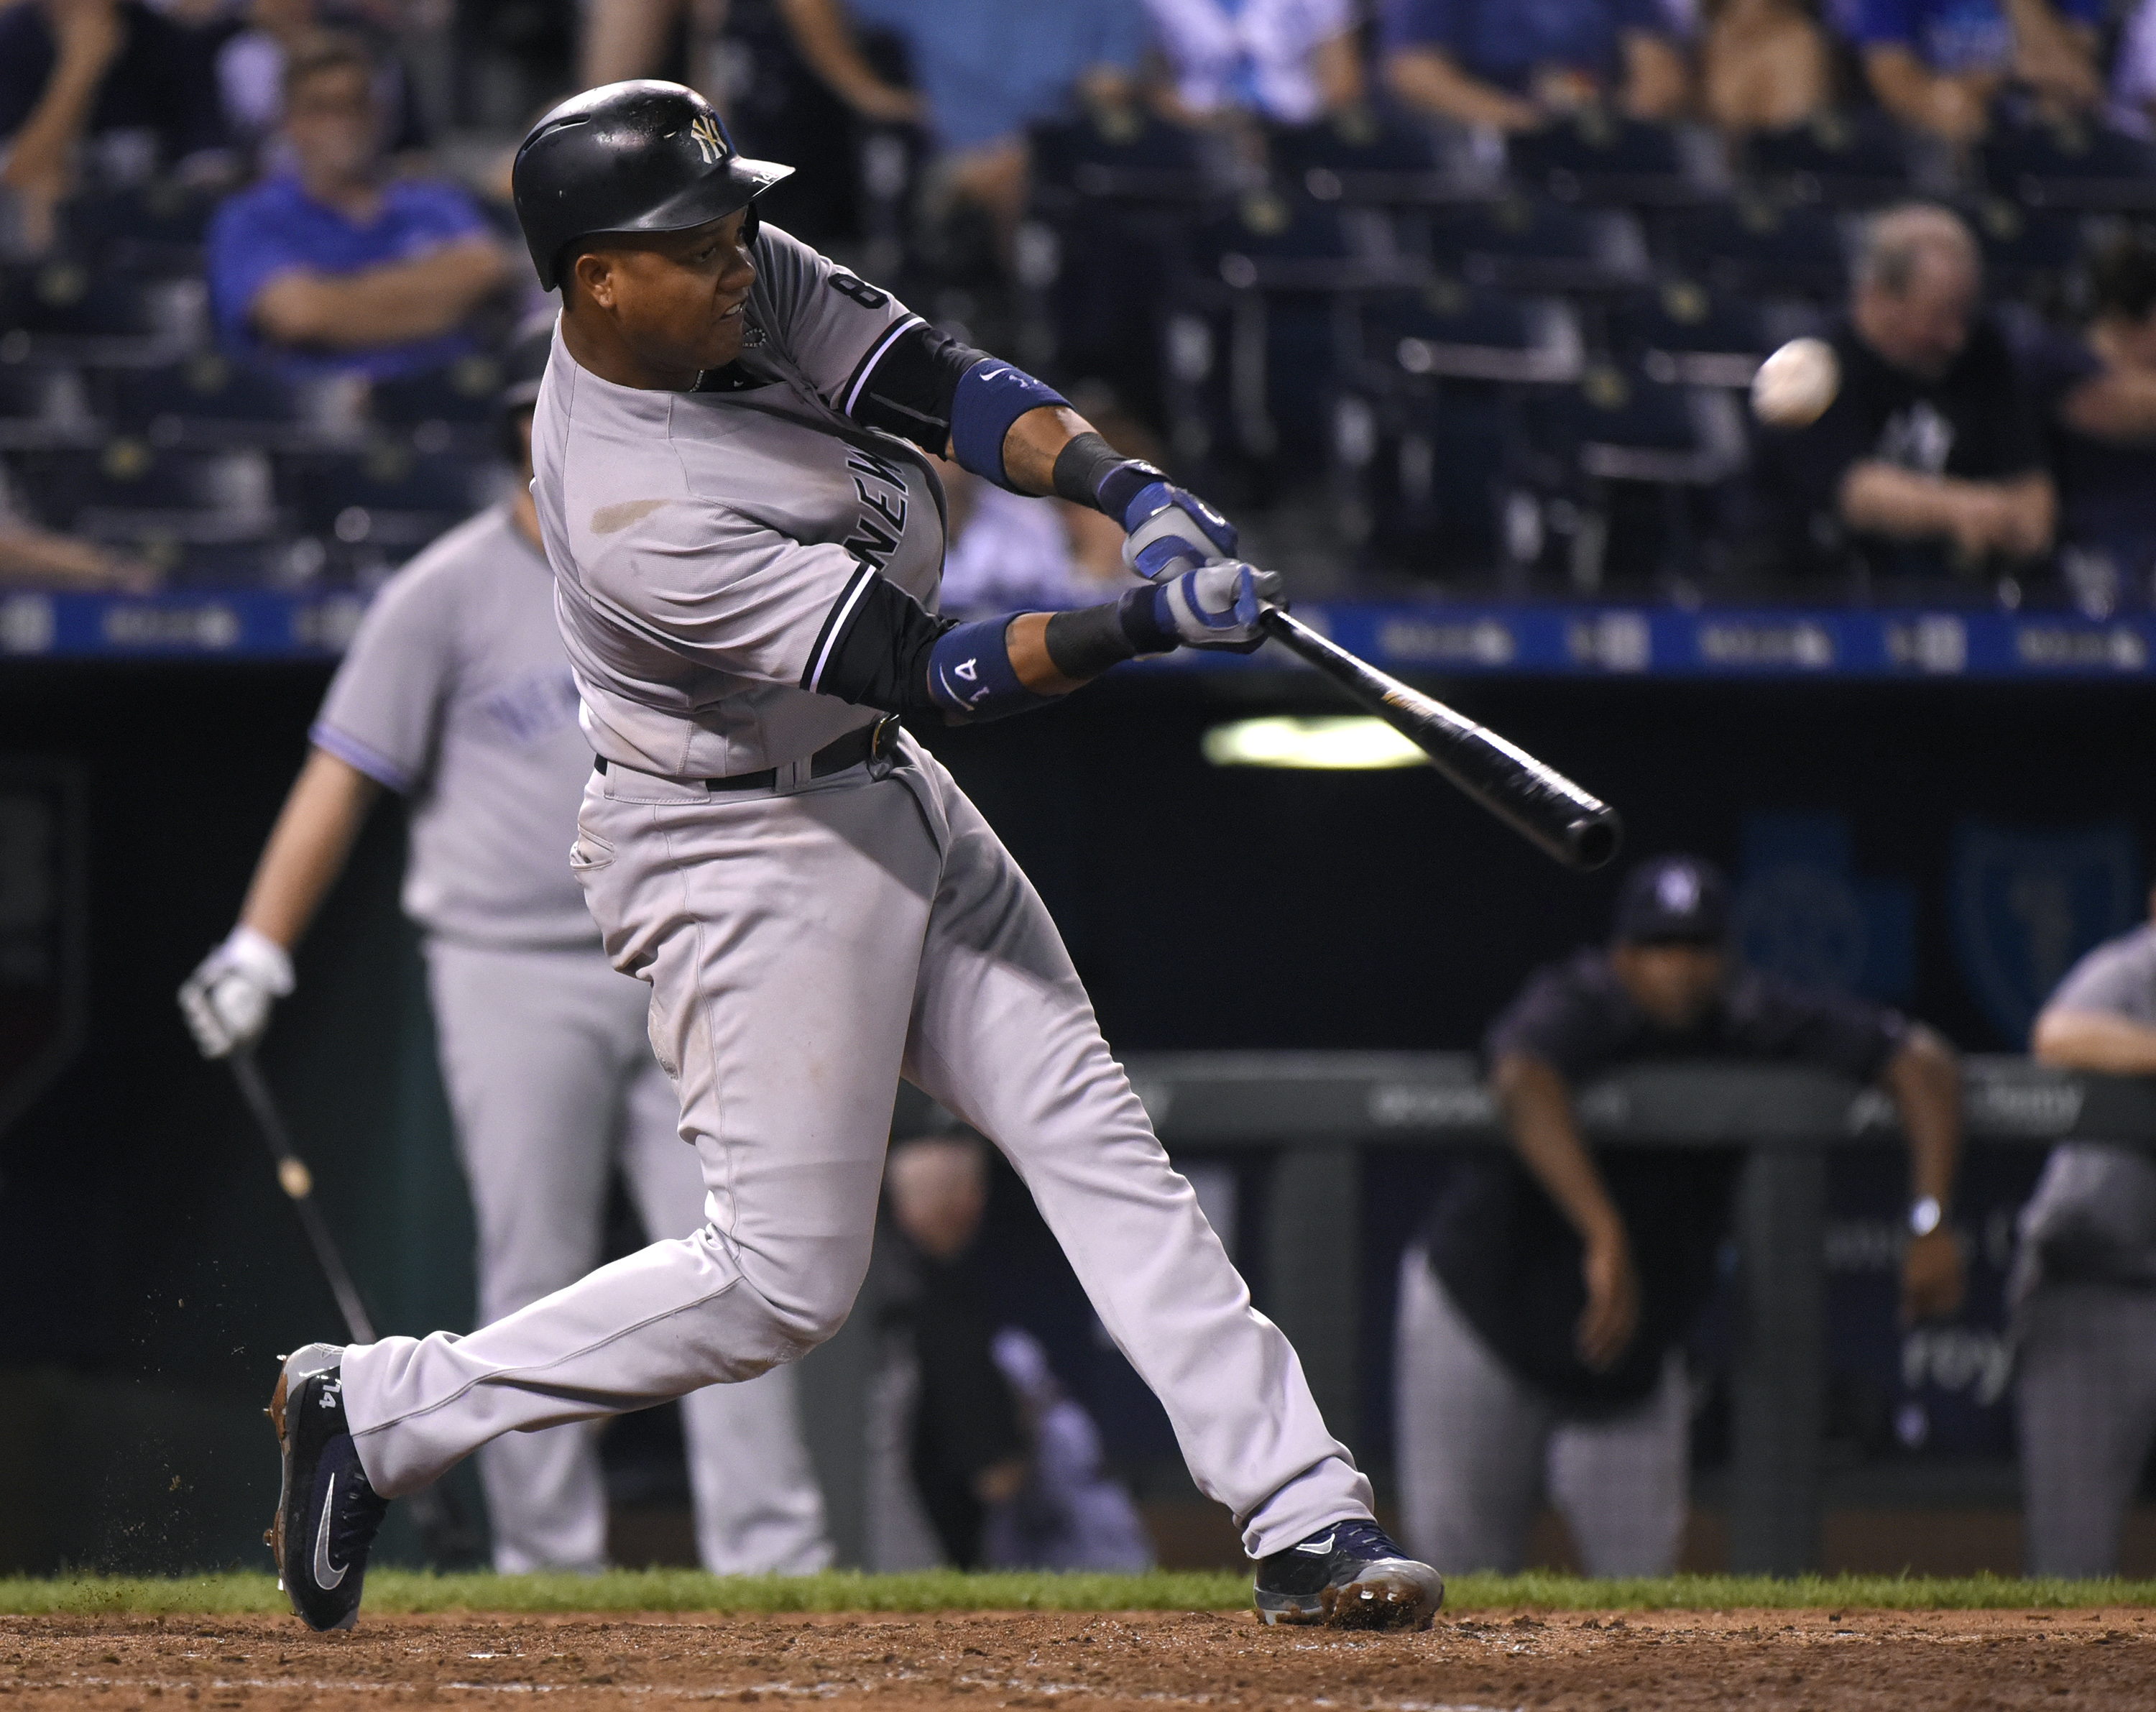 The 20 Least Powerful MLB Hitters Who Slugged 20-Plus Homers in 2016